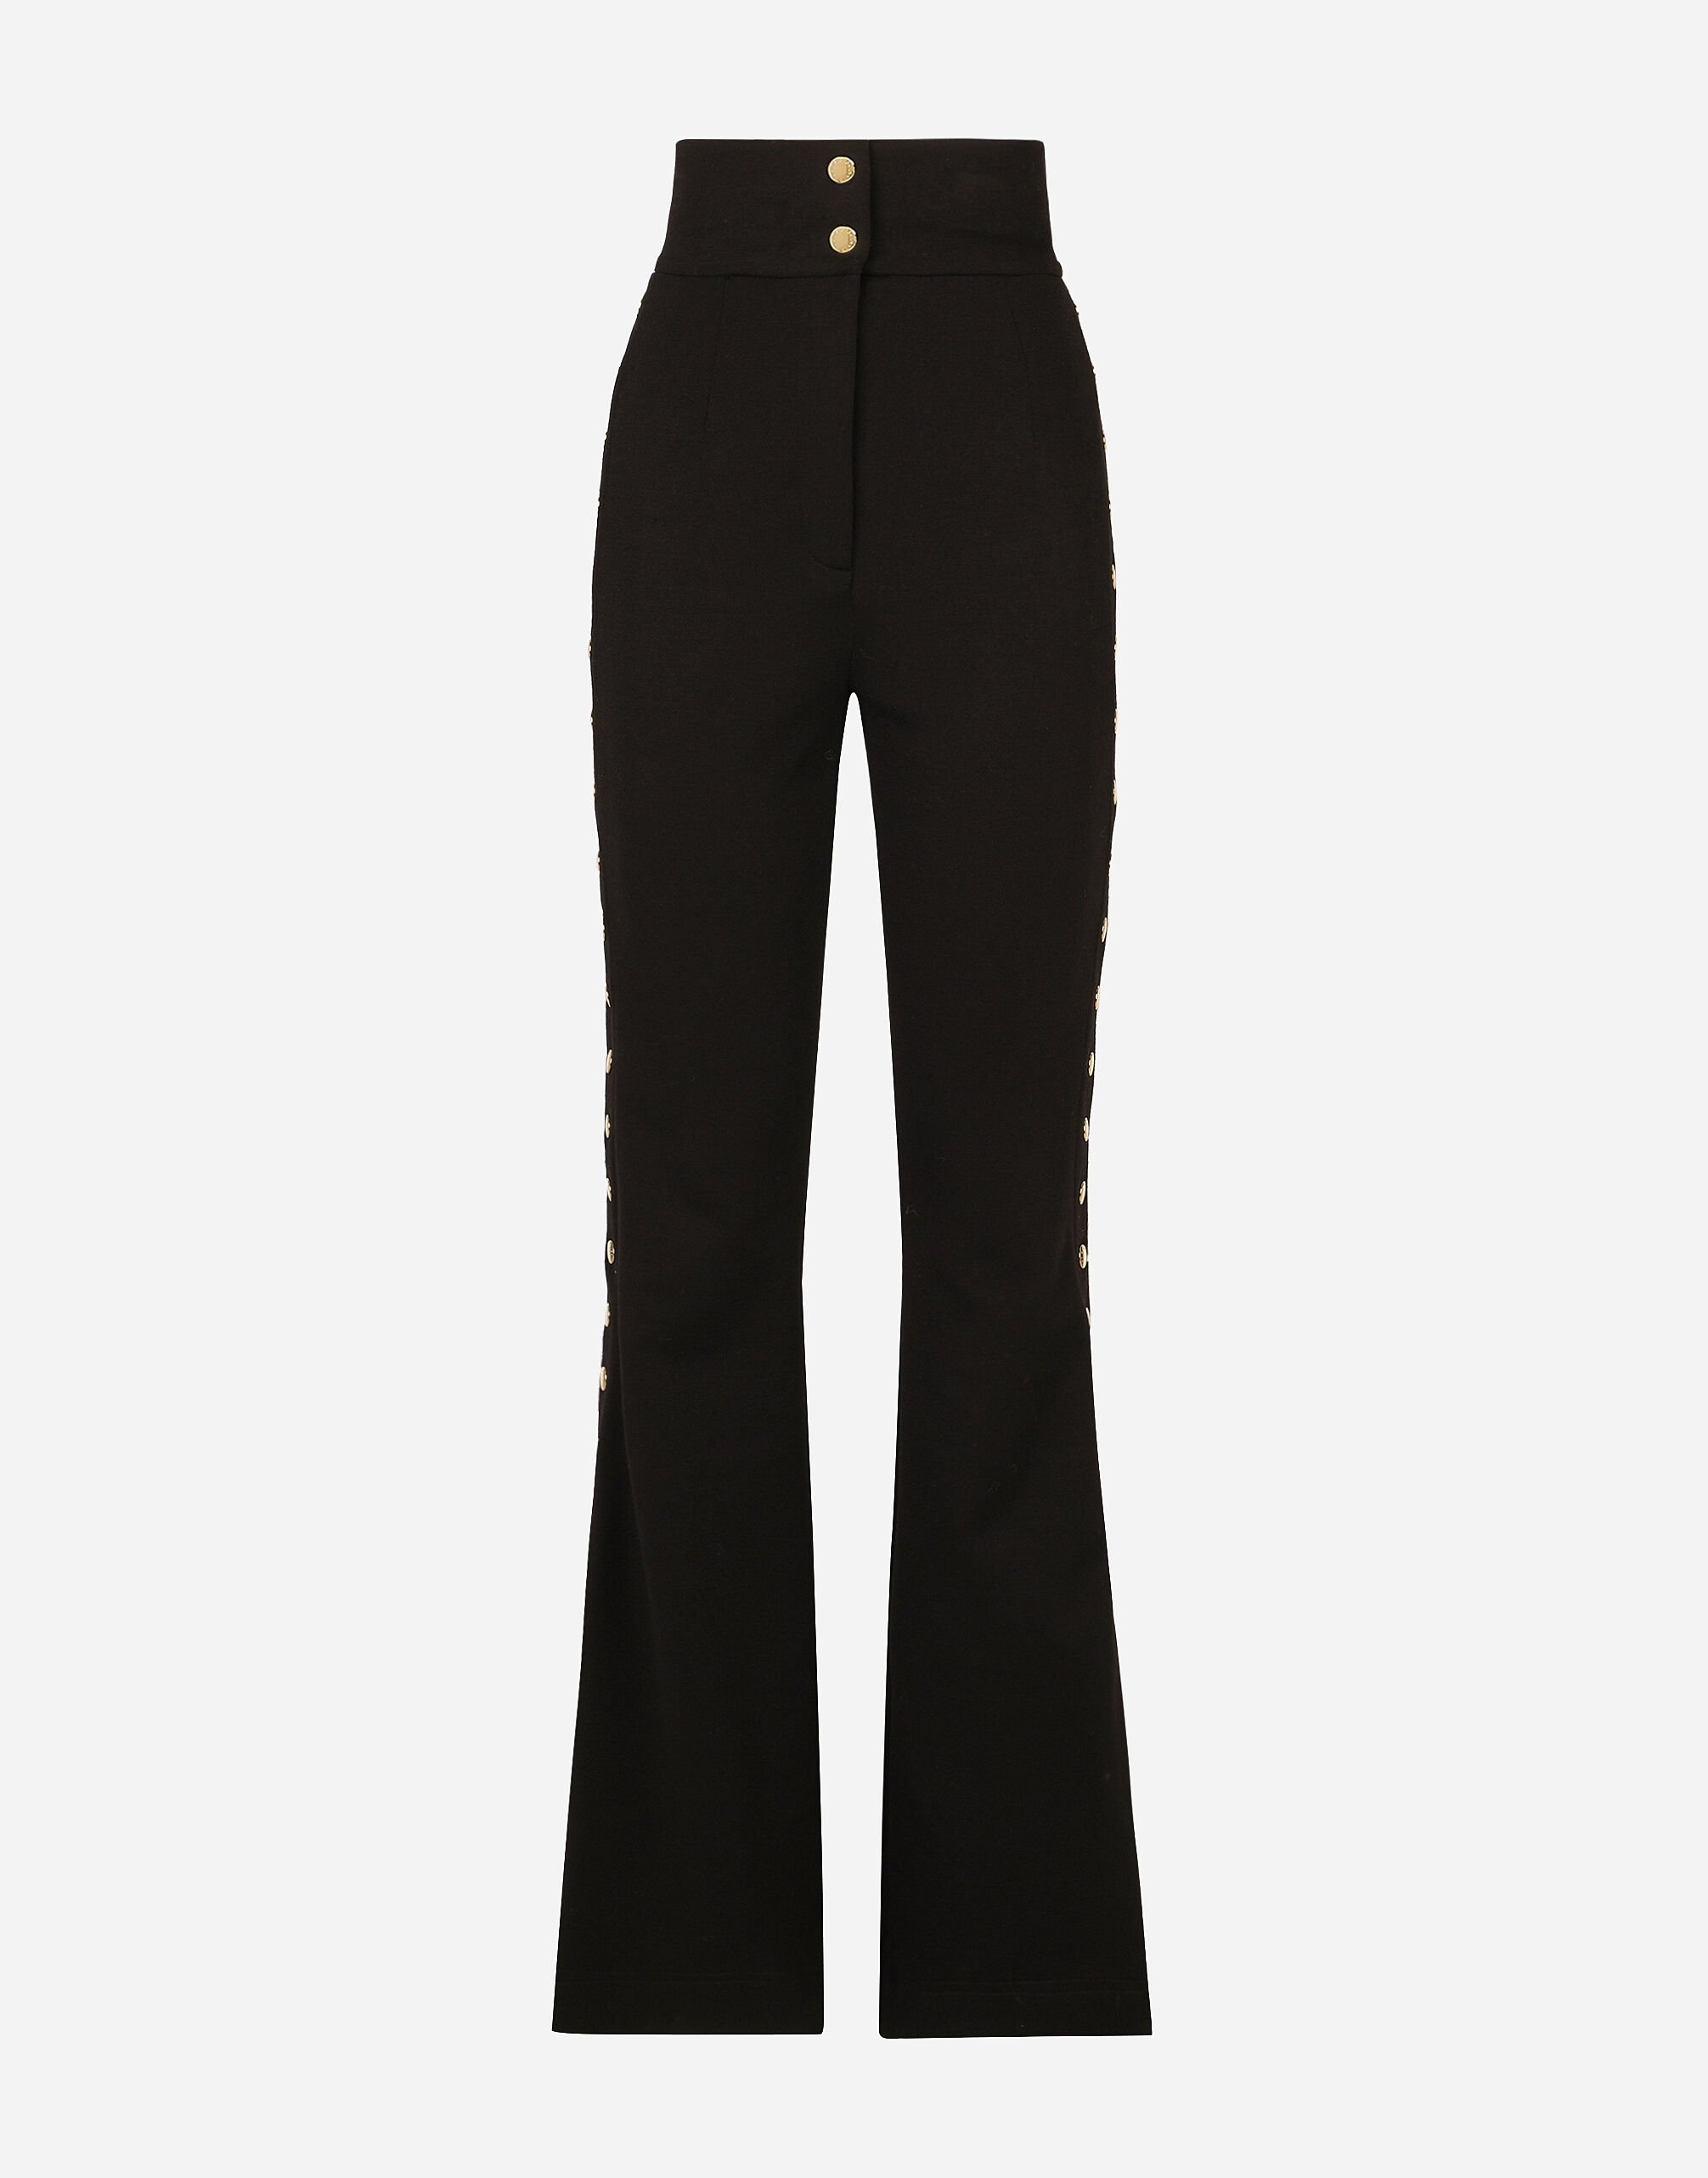 Dolce & Gabbana Full Milano pants with buttons down the side Black F759LTFLRC2